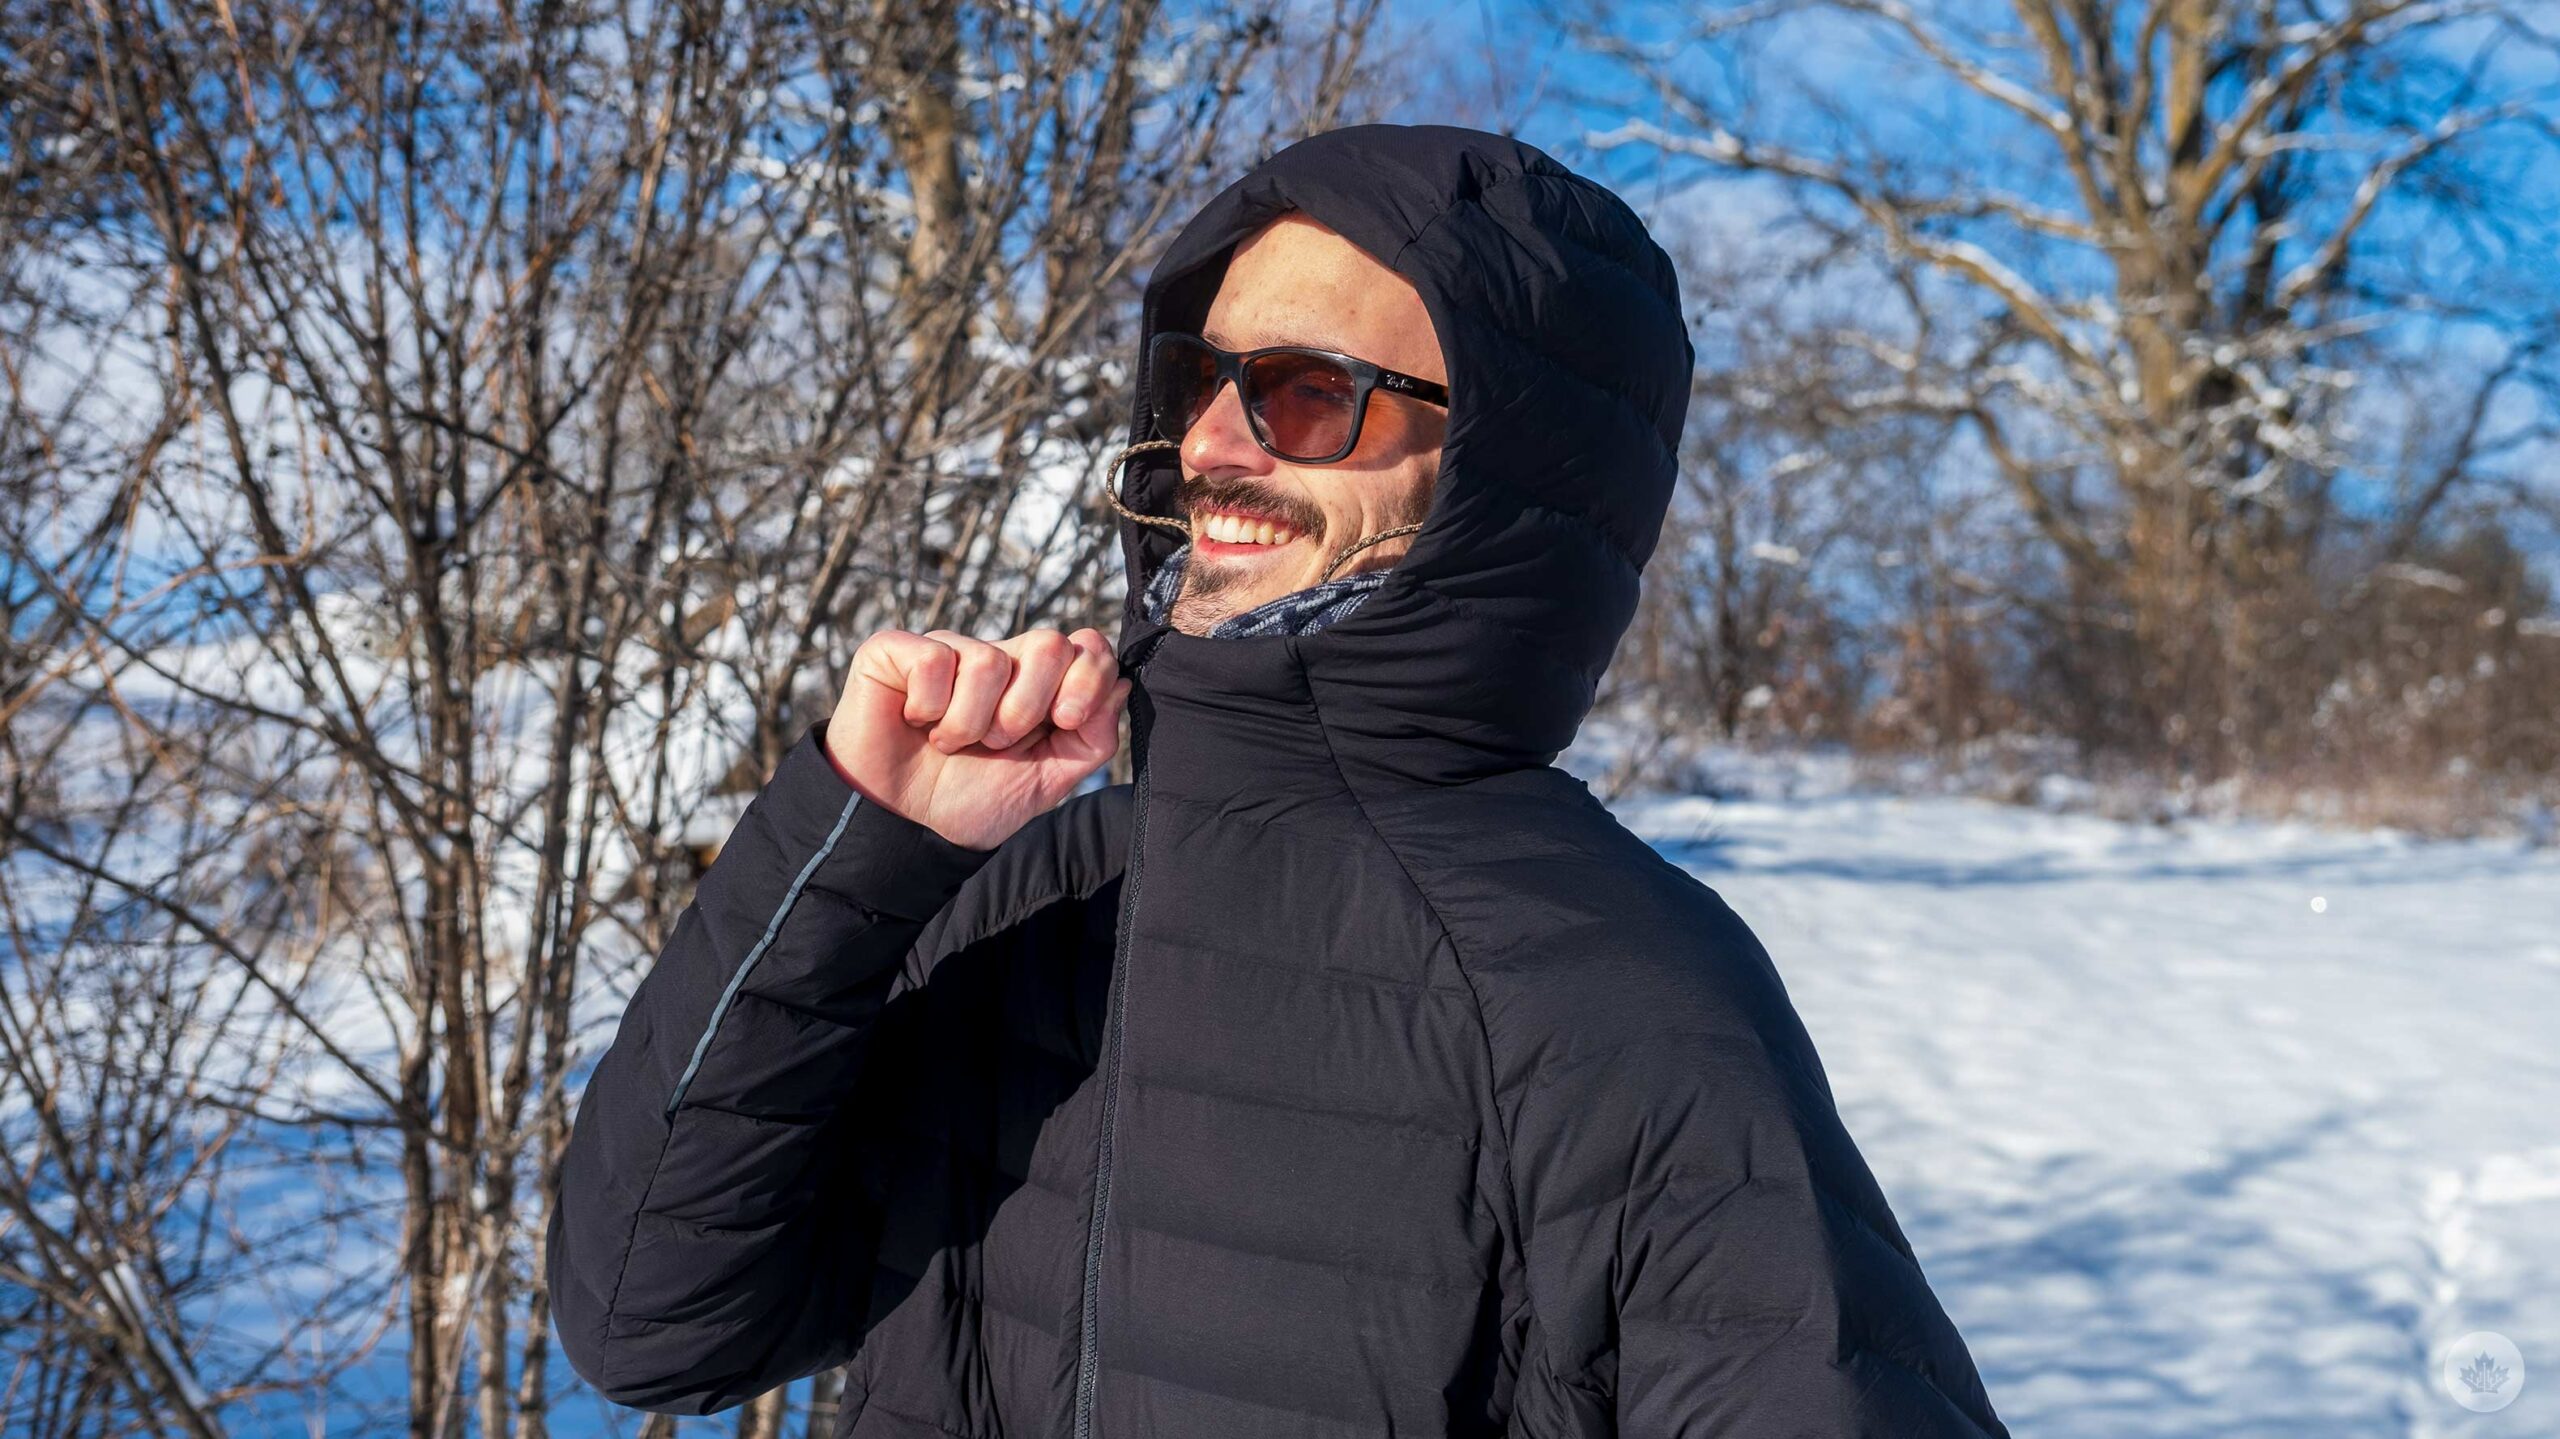 Lululemon's puffer jacket has tricks, but it can't quite steal the